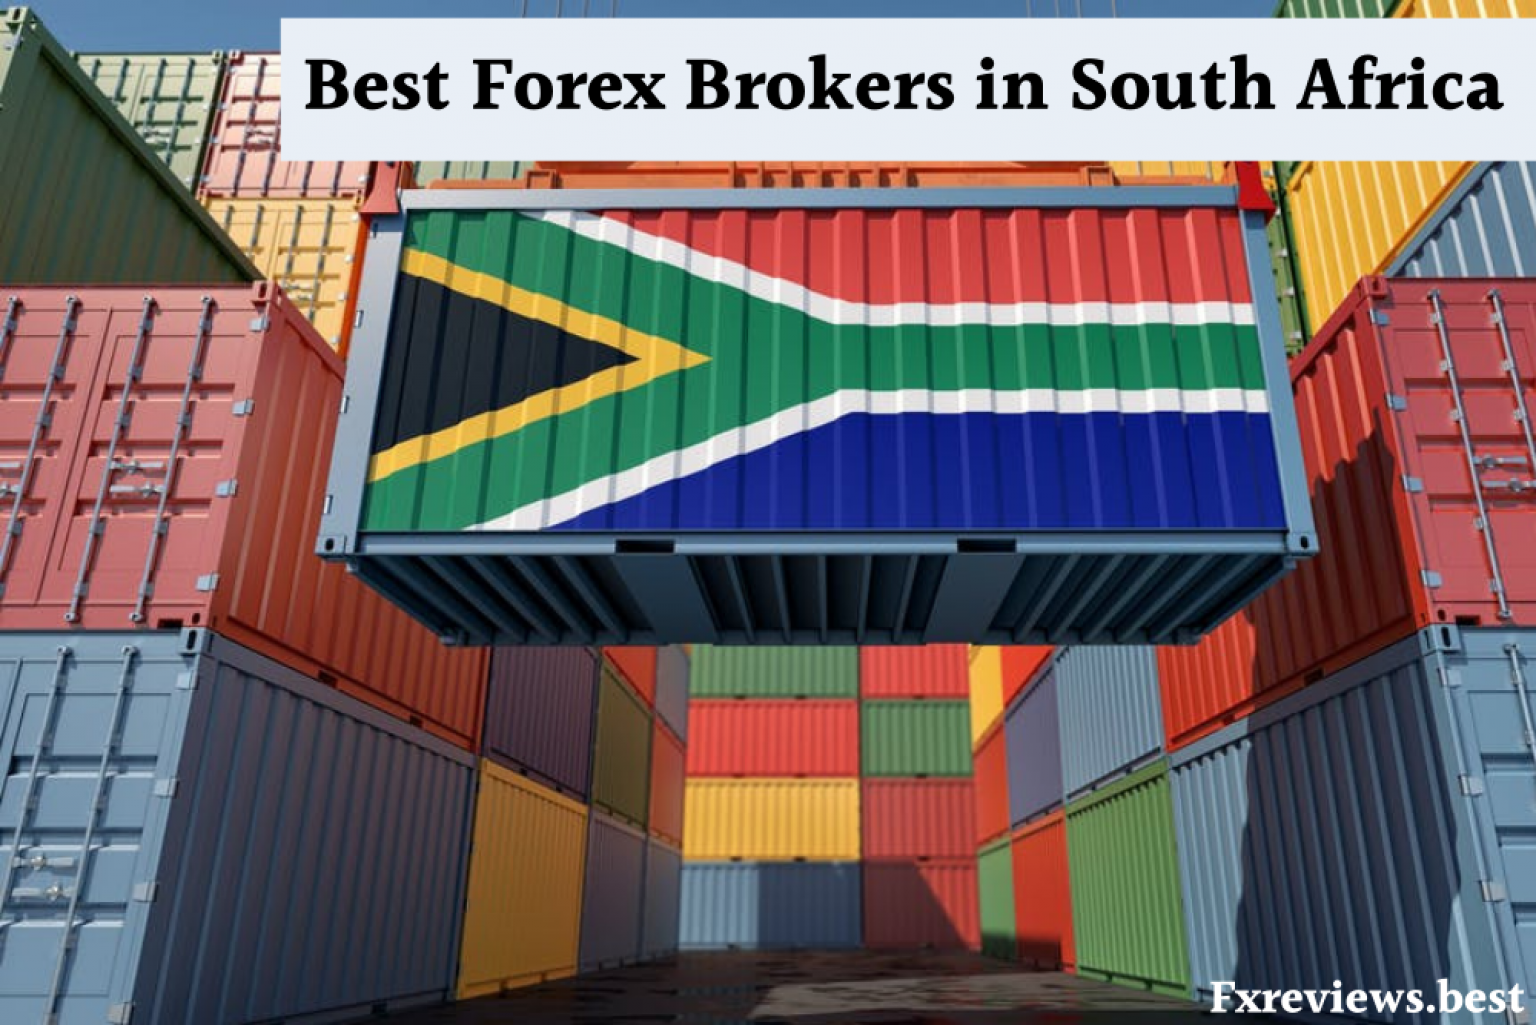 Top 6 best Forex Brokers in South Africa - Fxreviews.best